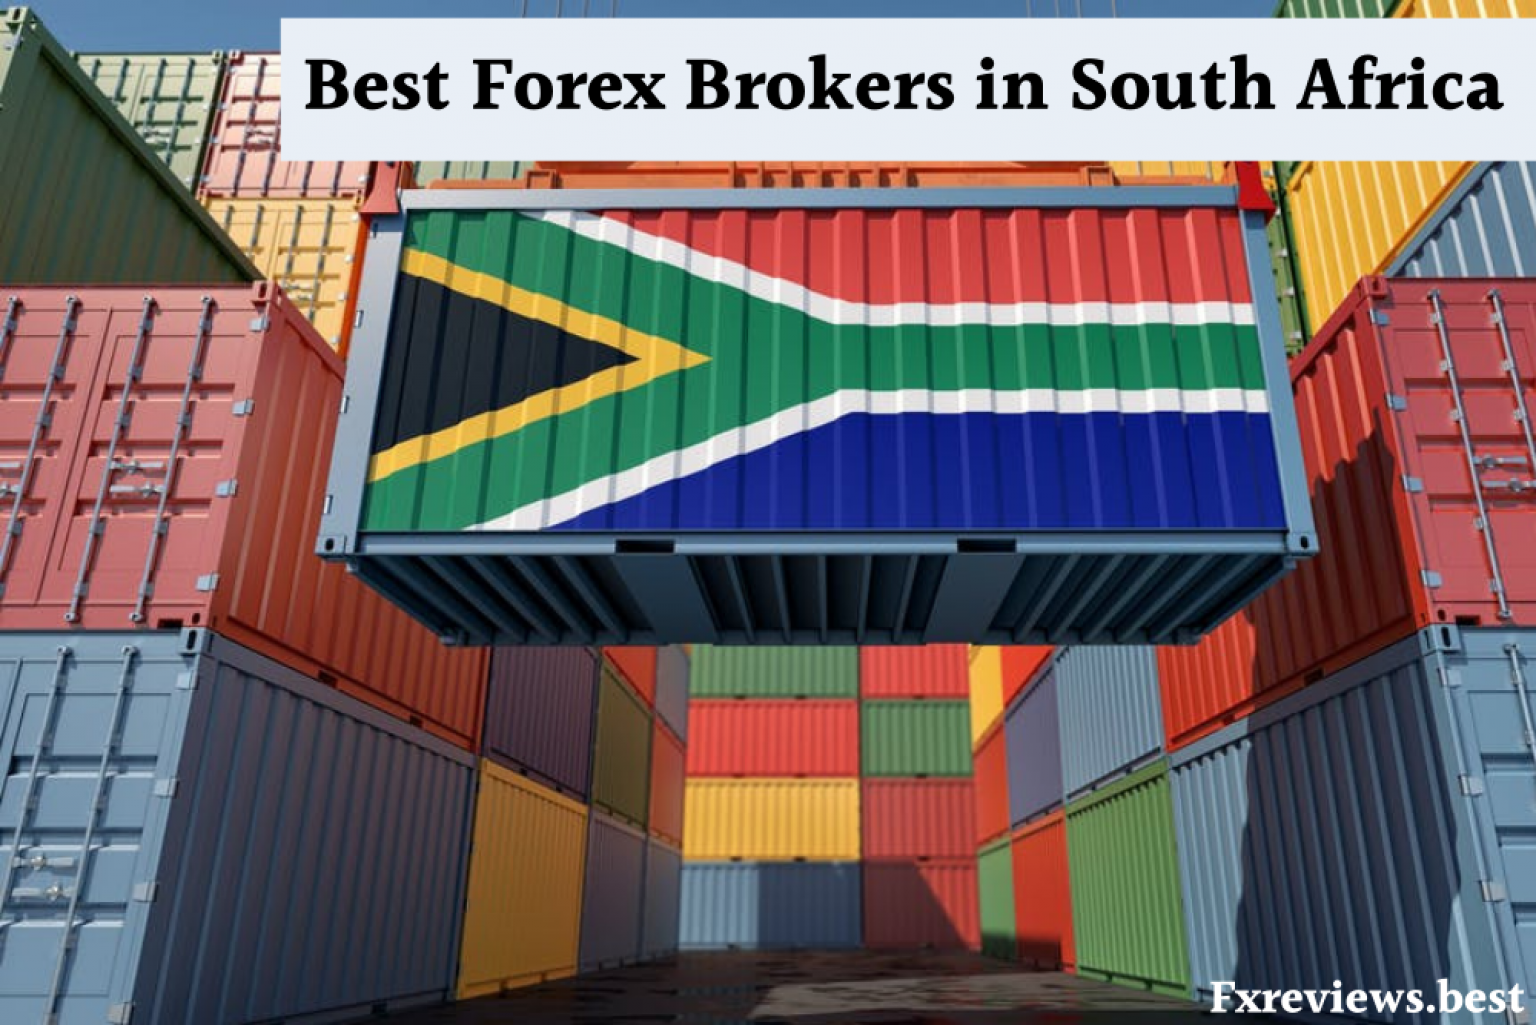 Top 6 best Forex Brokers in South Africa - Fxreviews.best